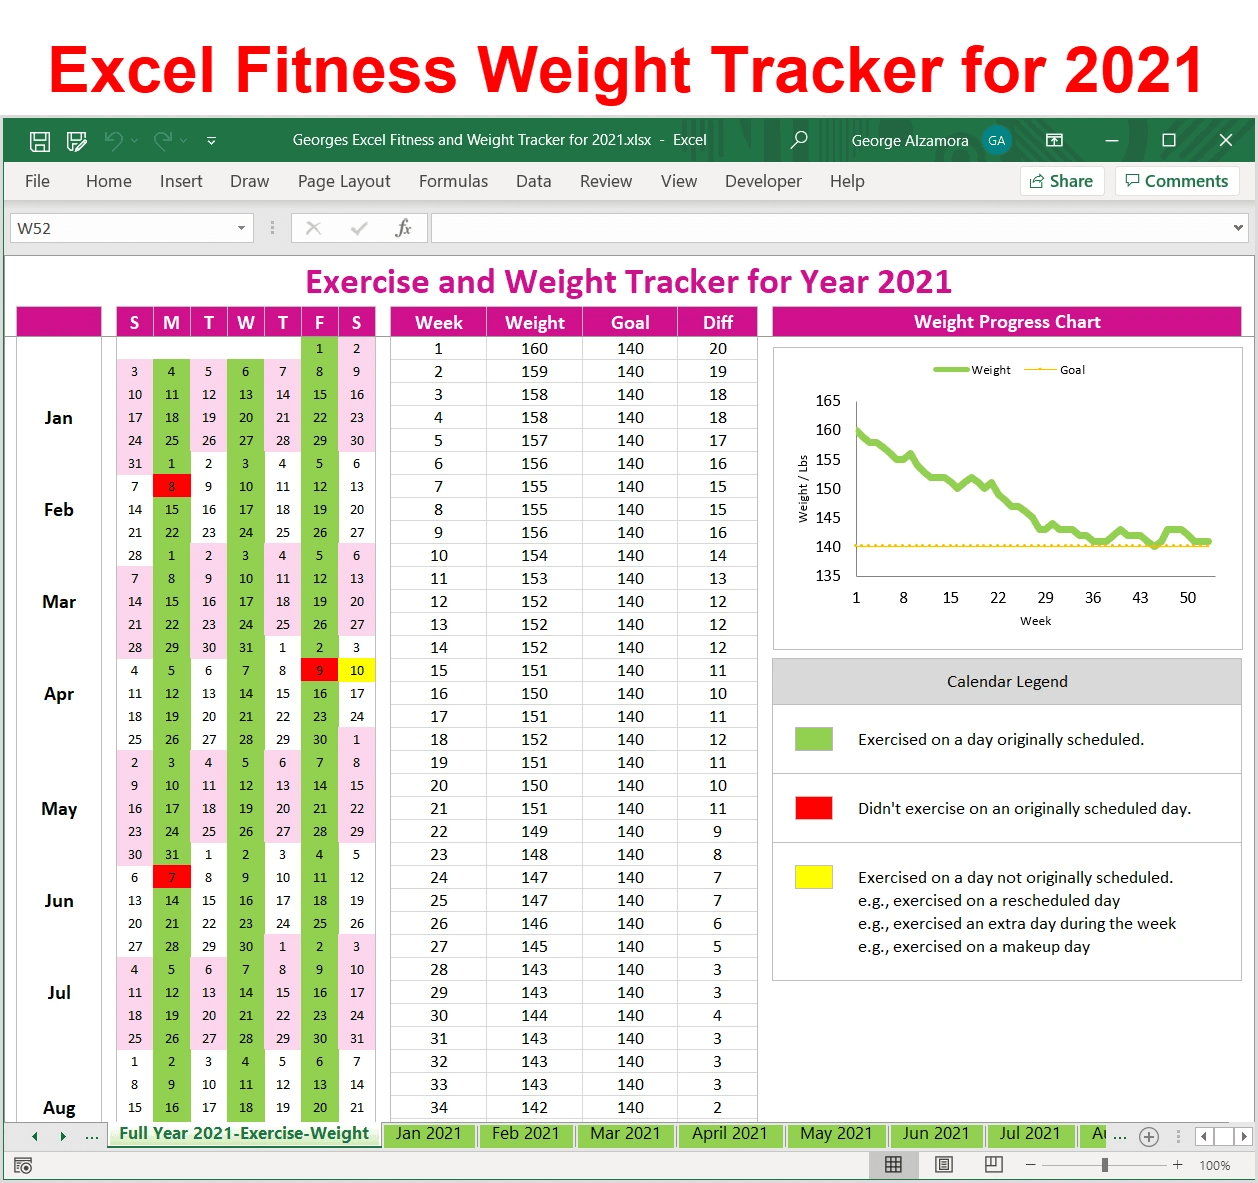 2021 Workout and Weight Loss Tracker: Excel Templates